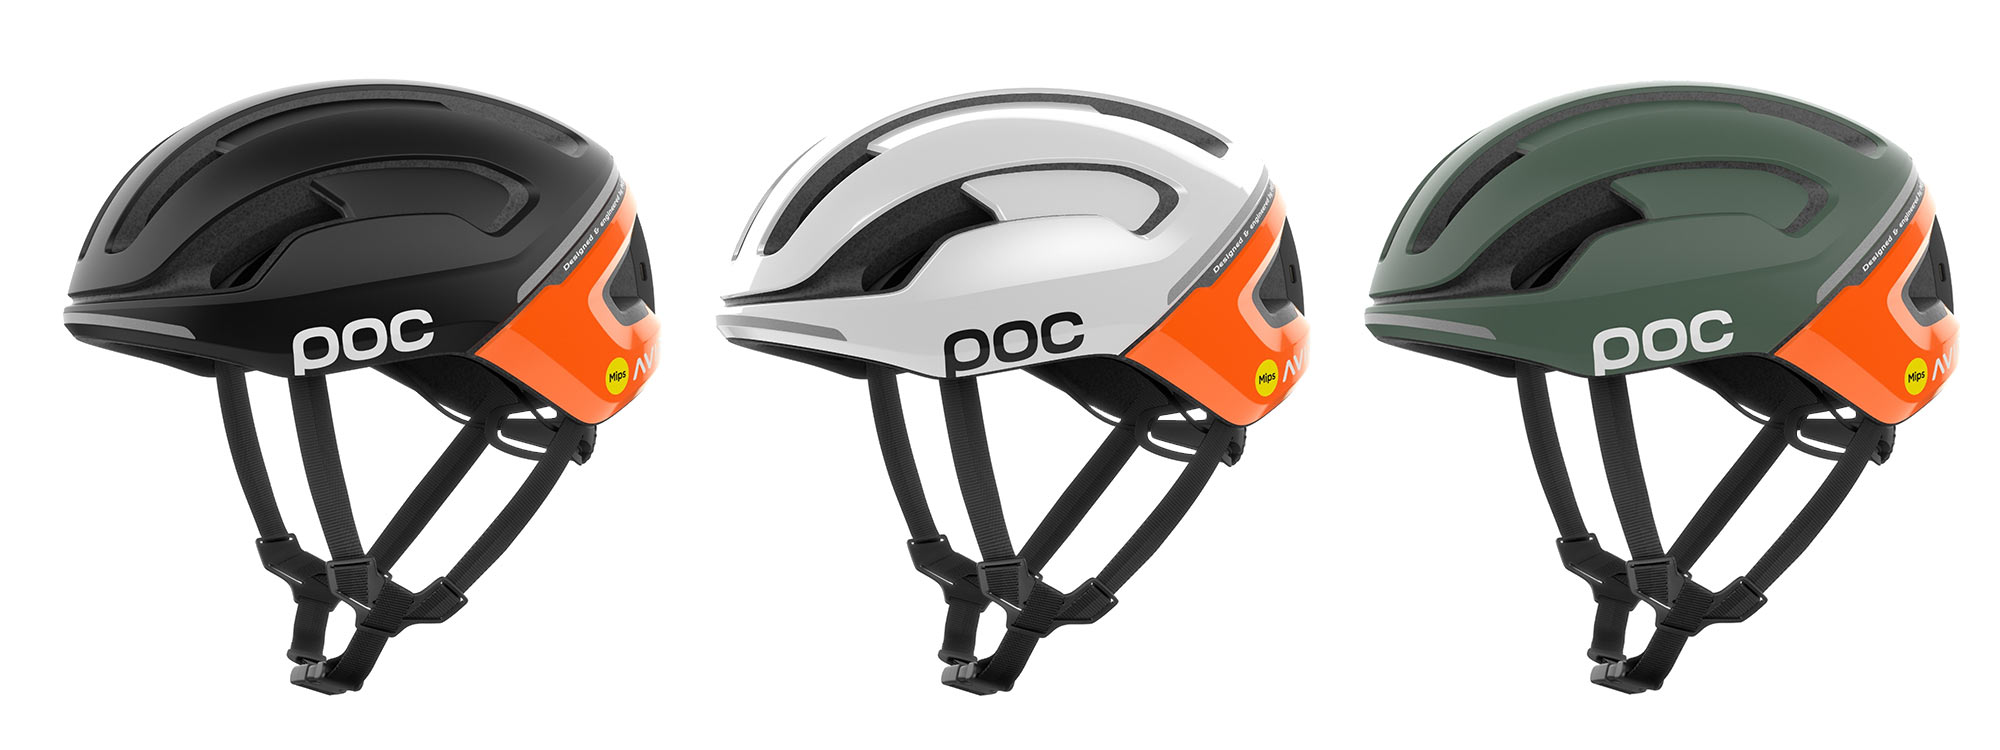 POC-Omne-Beacon-helmet-with-integrated-LED-taillight_AVIP-color-options.jpg